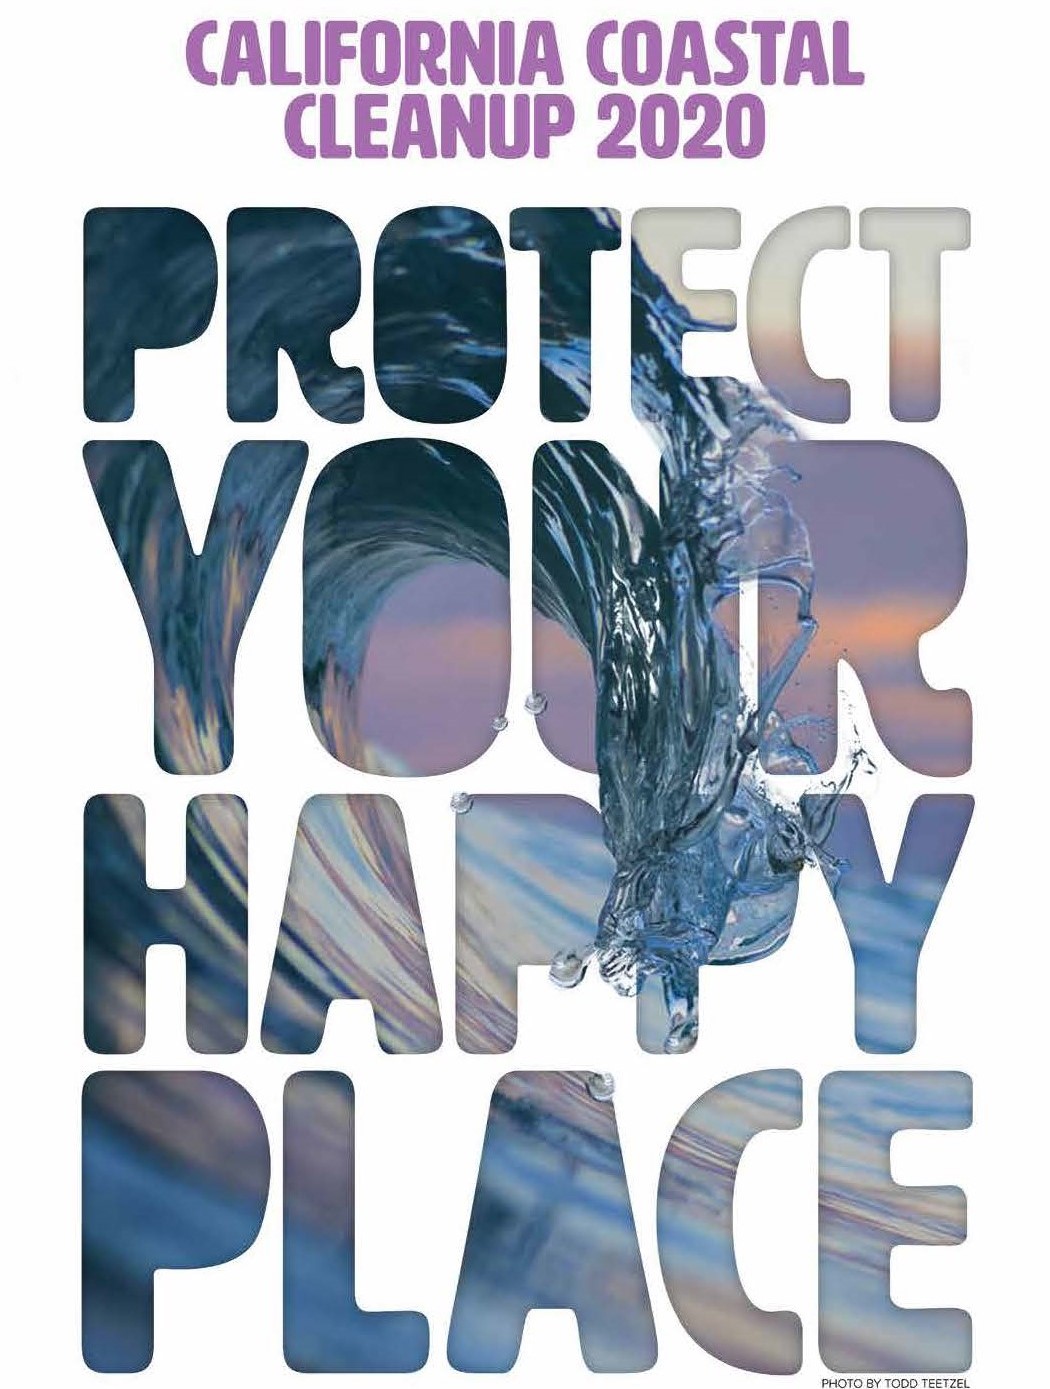 California Coastal Cleanup, Protect Your Happy Place. With image of a wave behind the letters